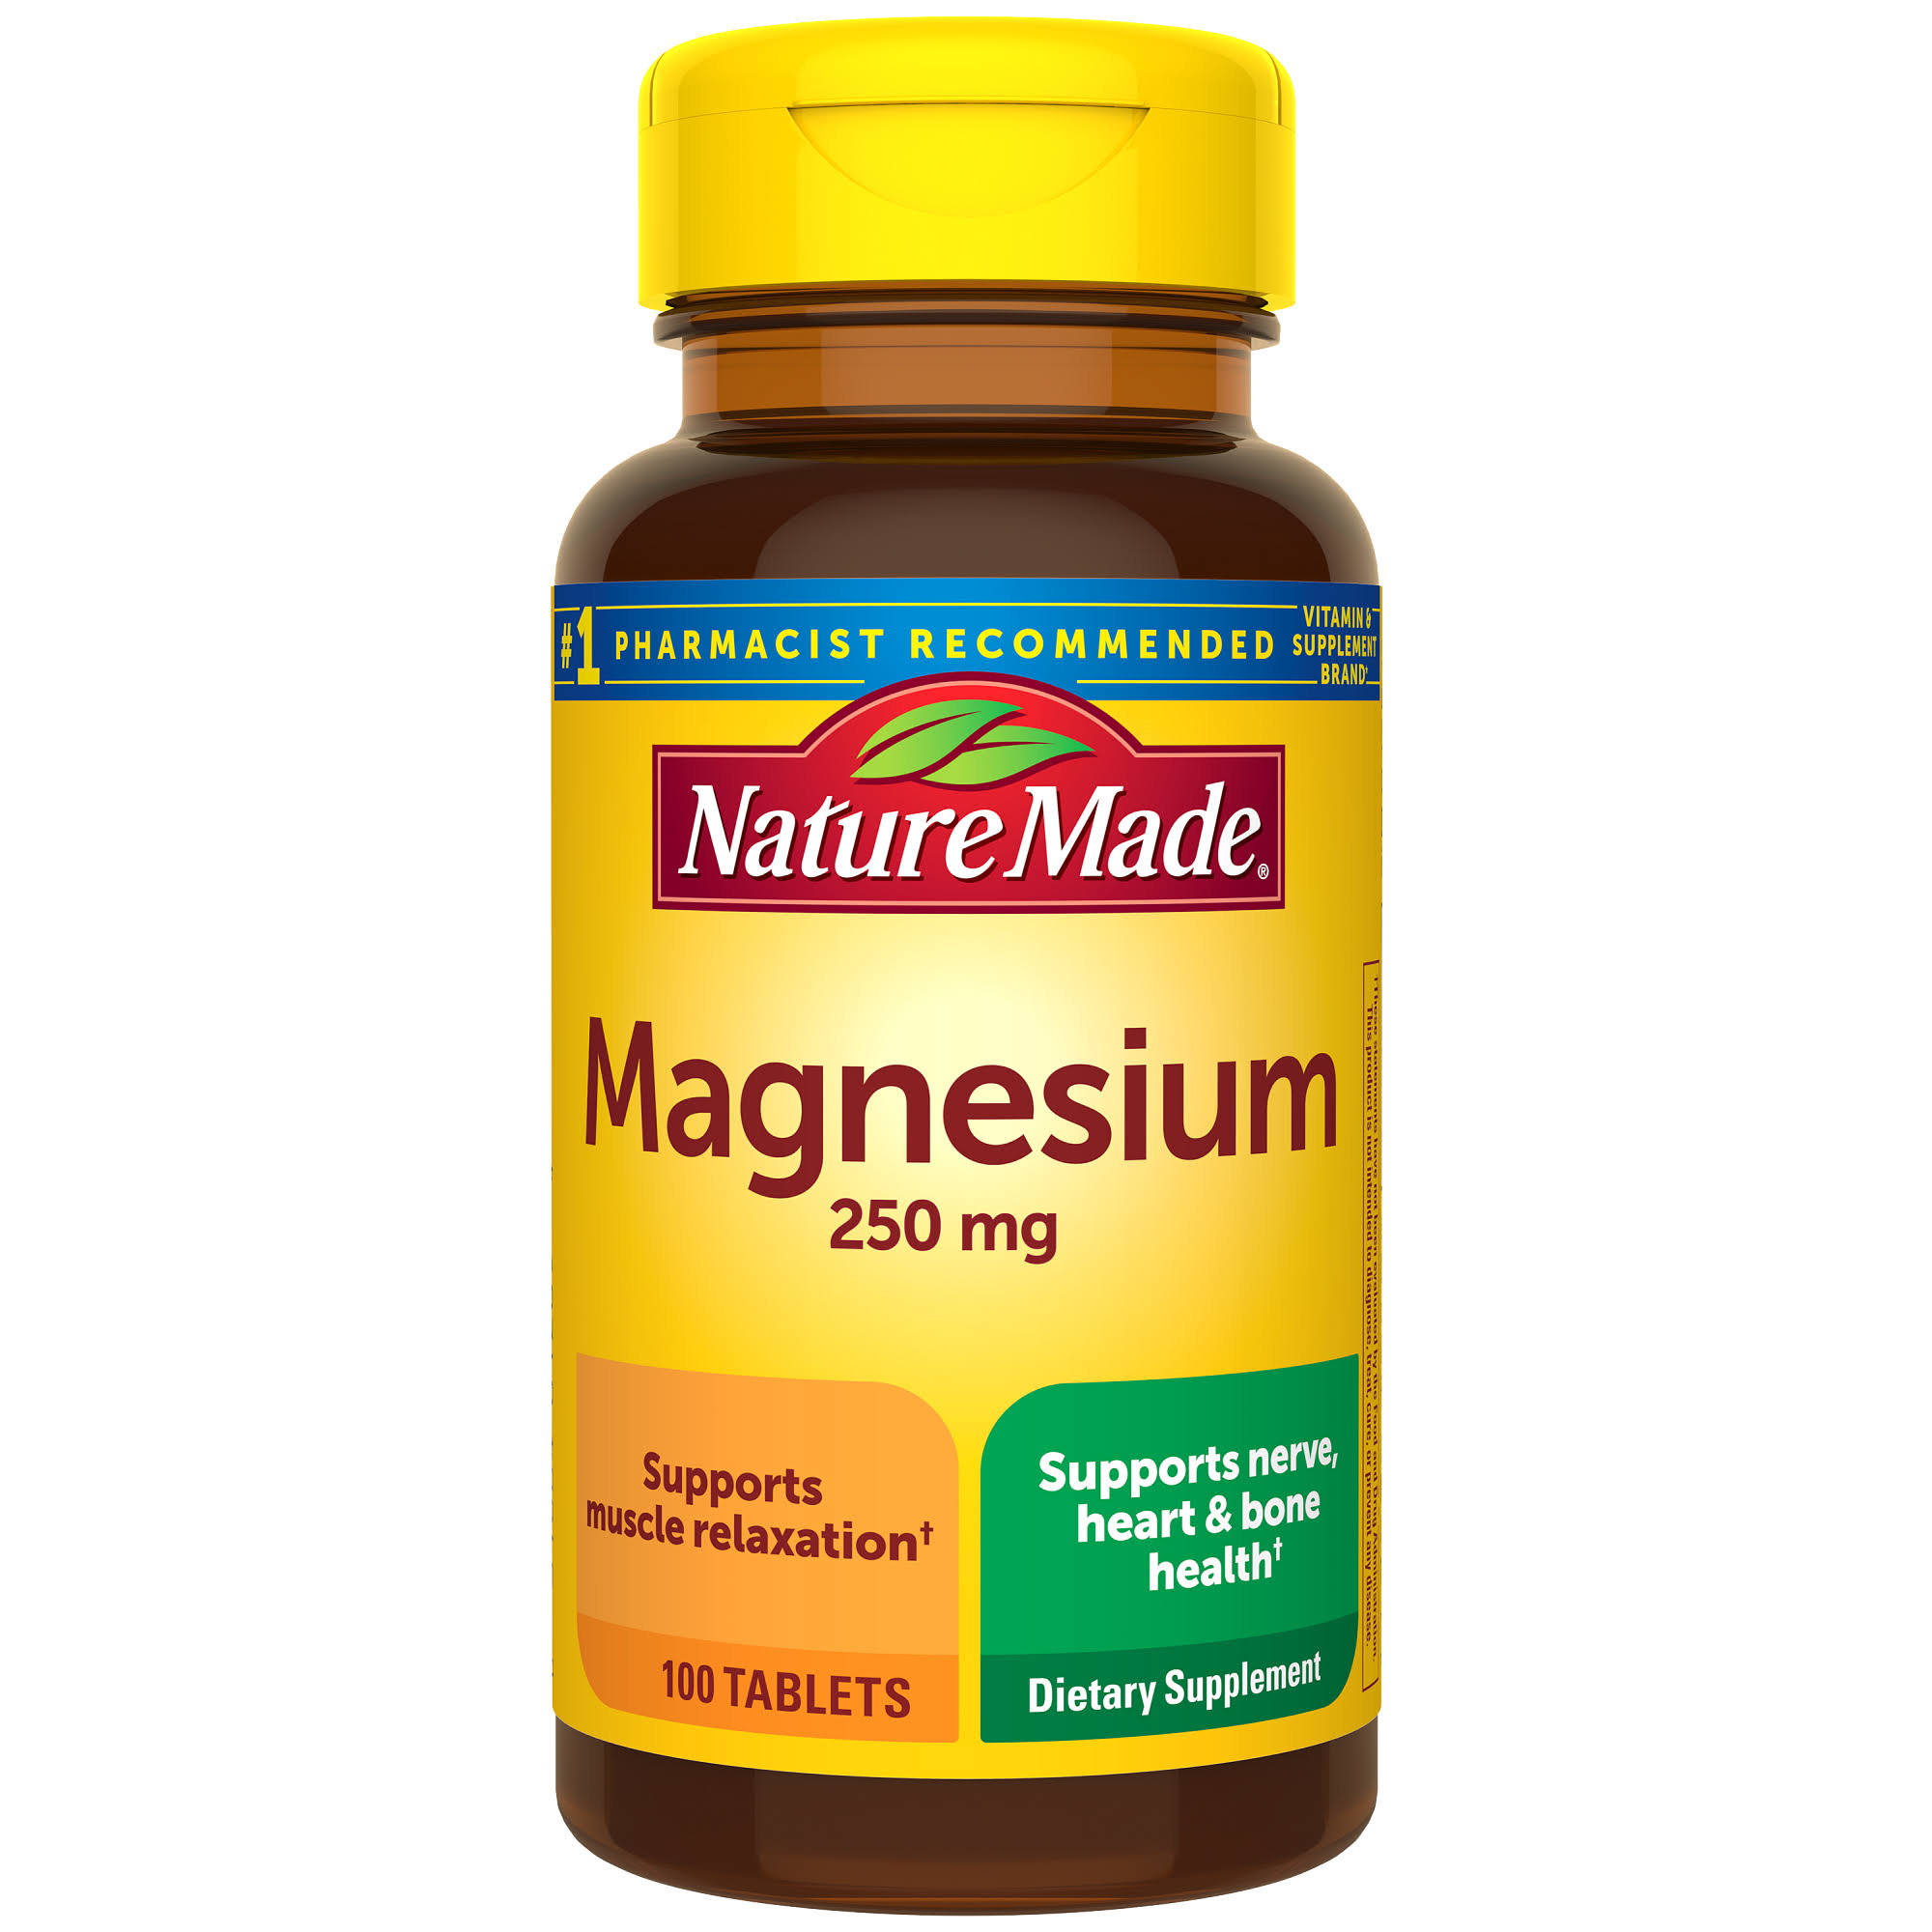 Nature Made Magnesium 250mg Dietary Supplement - 200 Tablets